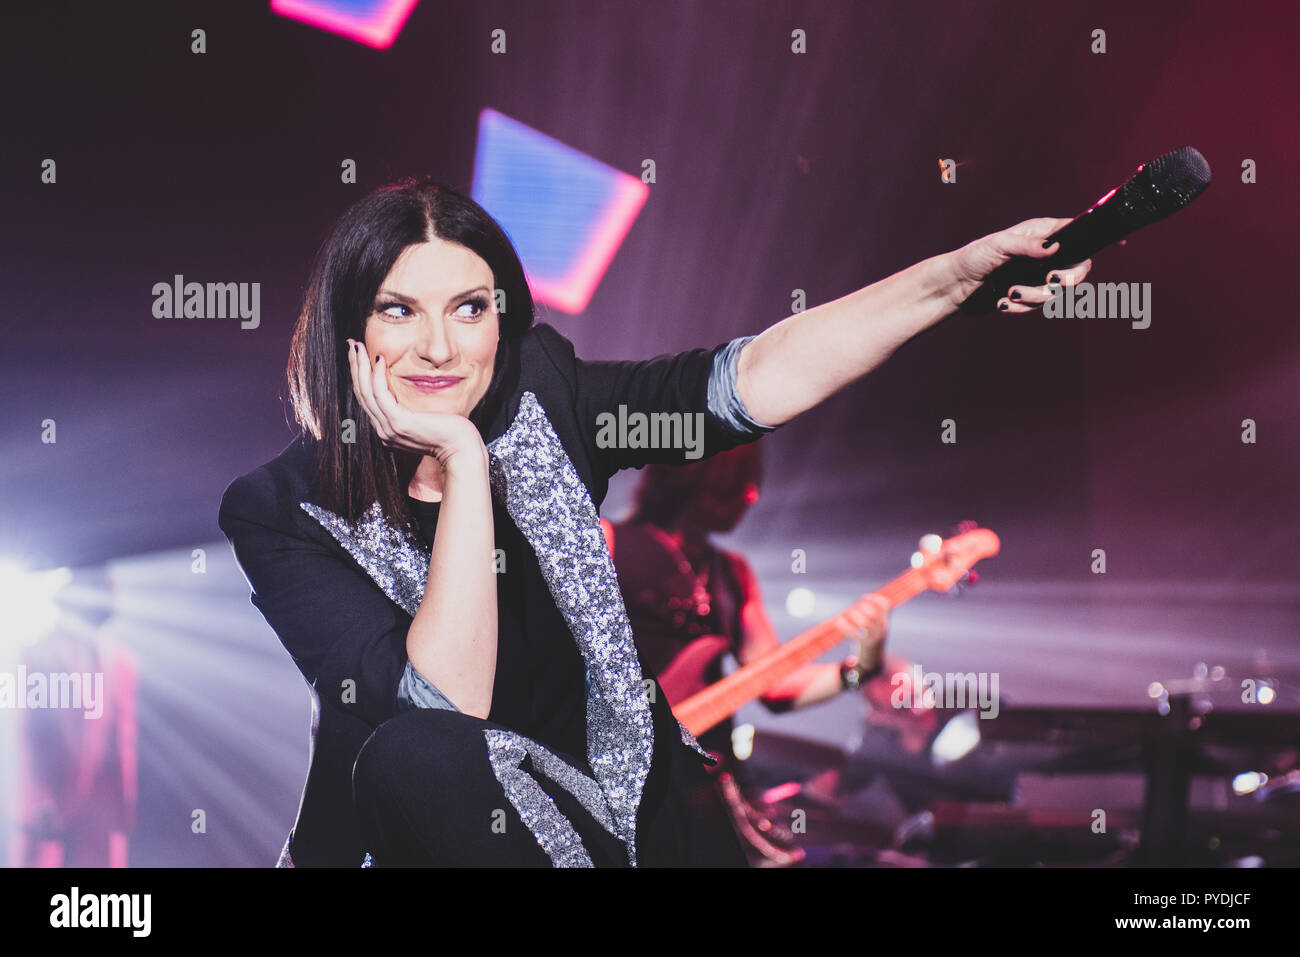 Torino, Italy. 27th Oct, 2018. Laura Pausini performing live on stage for the 'Fatti Sentire' world tour 2018 in Torino, in front of a sold out arena. Credit: Alessandro Bosio/Pacific Press/Alamy Live News Stock Photo